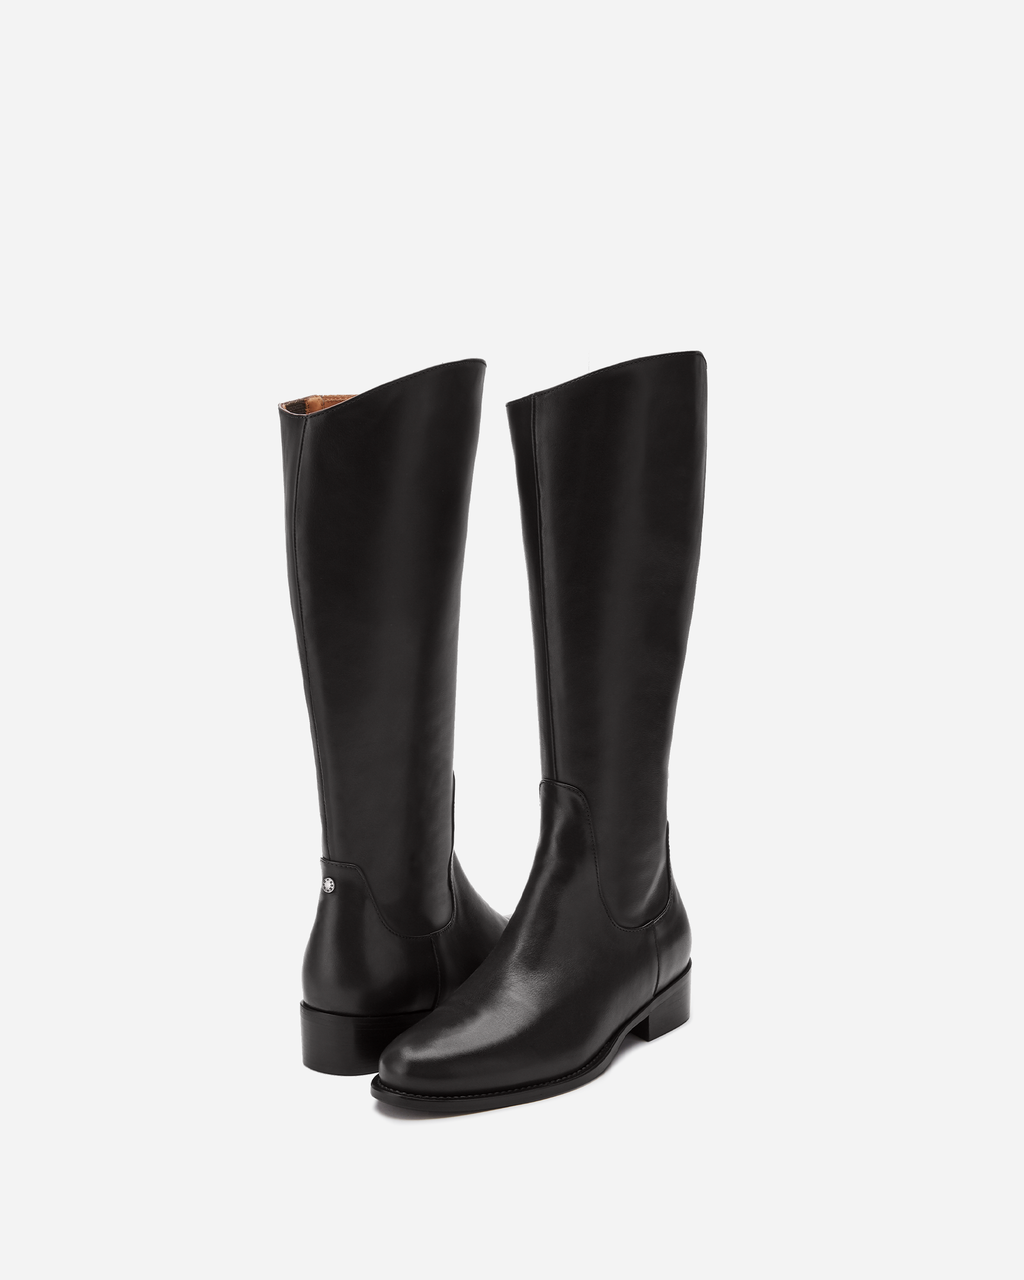 Verity Knee High Boots in Black Leather – DuoBoots